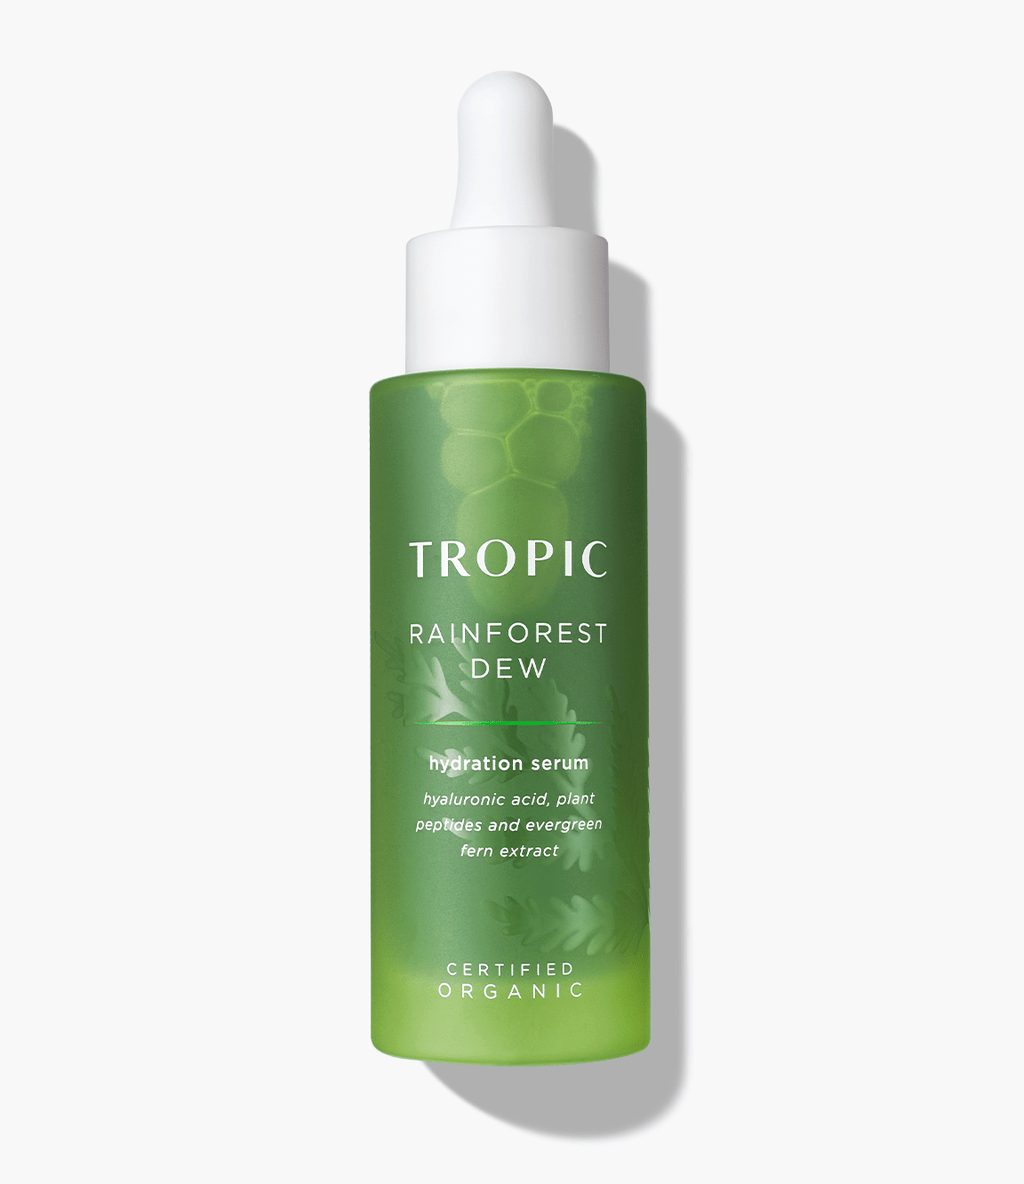 TROPIC RAINFOREST XDEW hration S hyaluronic acid, plant pepliges and evergreen GRS CERTIFIED ORGANIC 